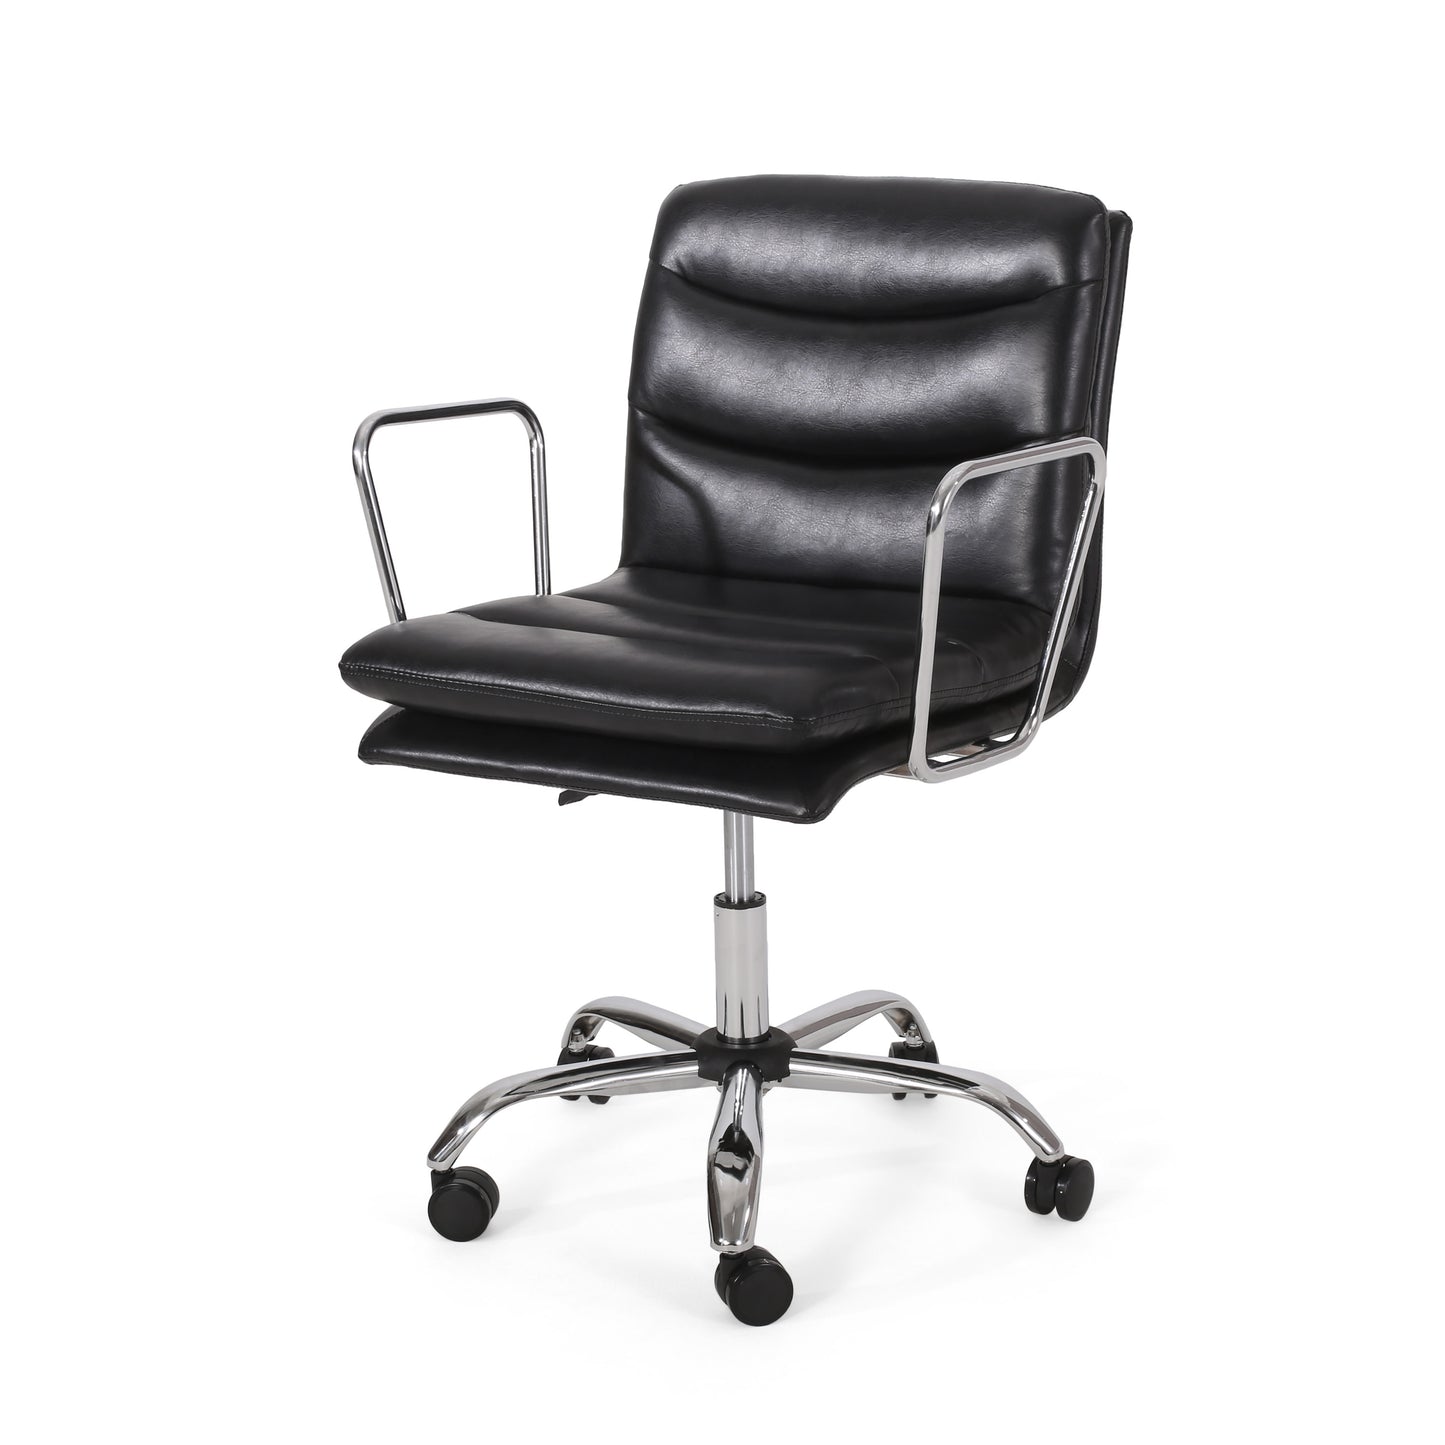 Gould Contemporary Faux Leather Channel Stitch Swivel Office Chair